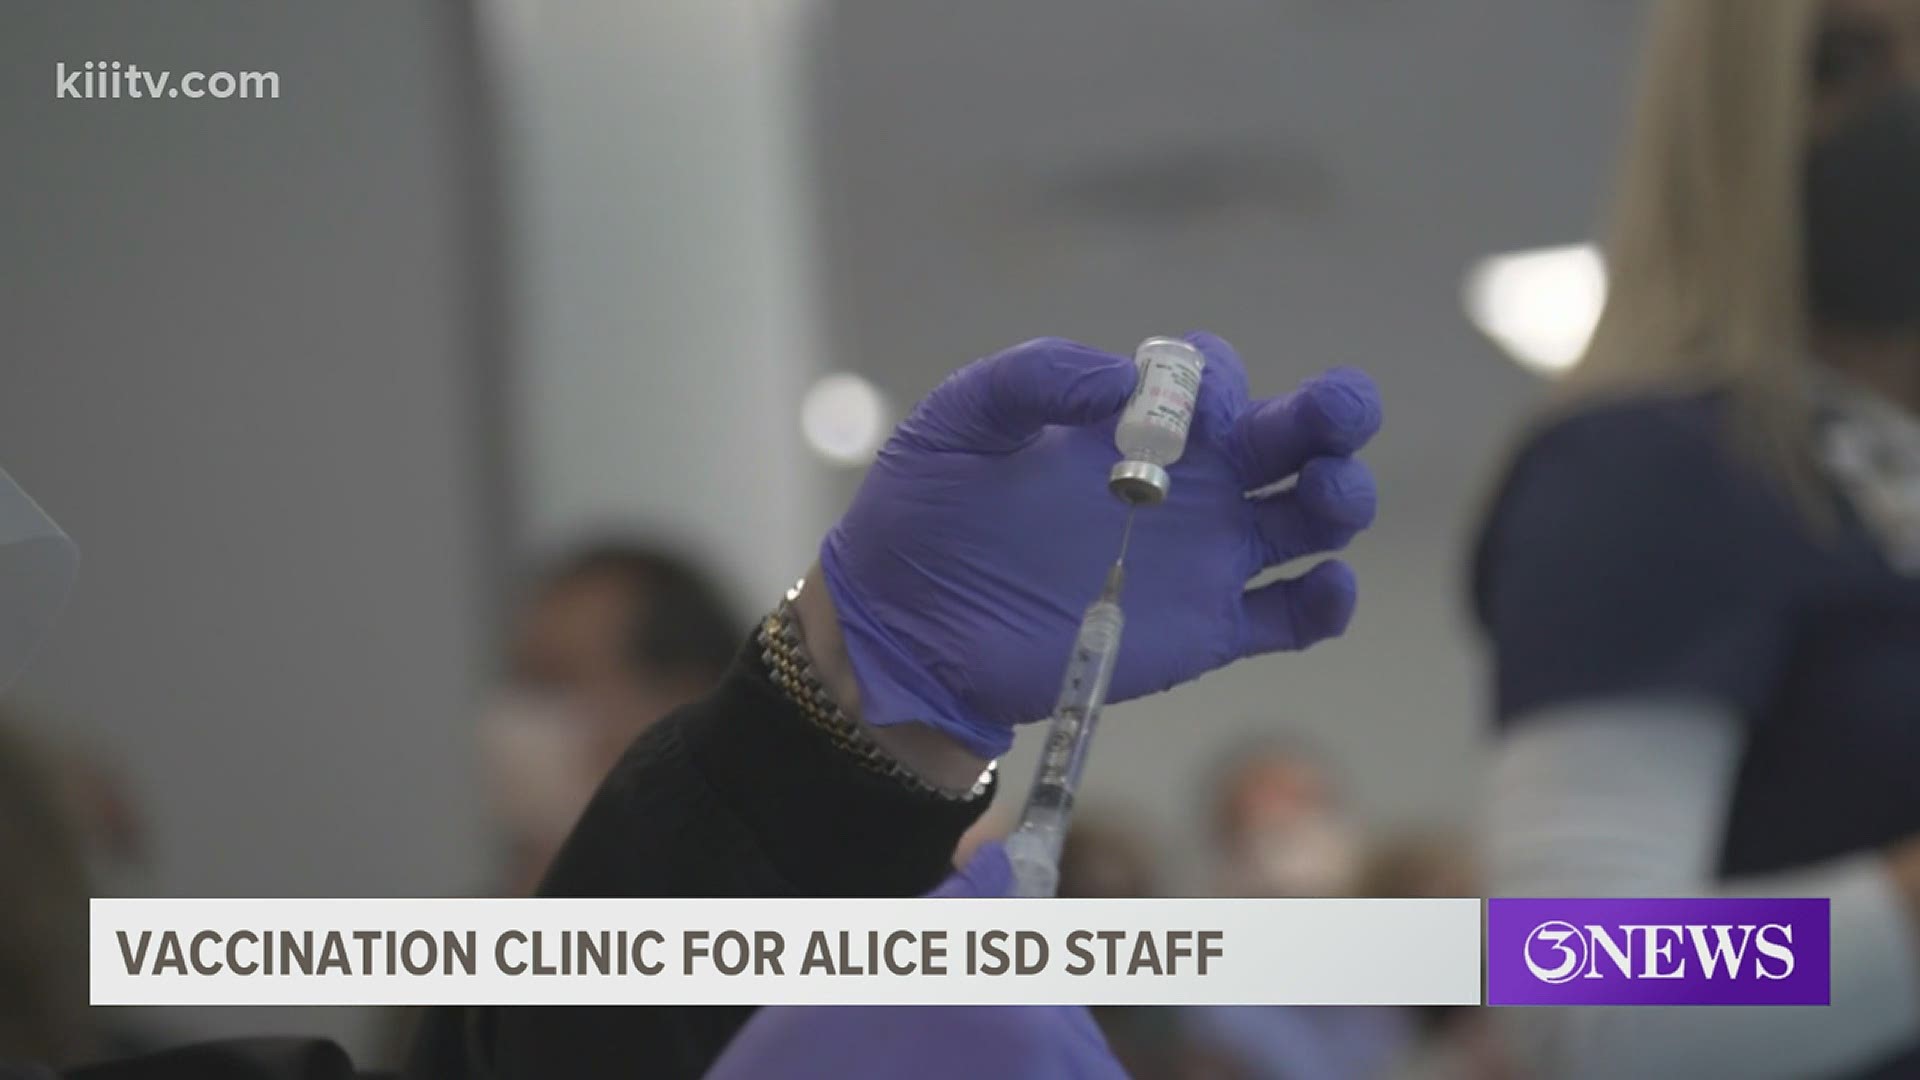 Out of 450 vaccines being given out Saturday, about 270 are designated for Alice ISD employees.